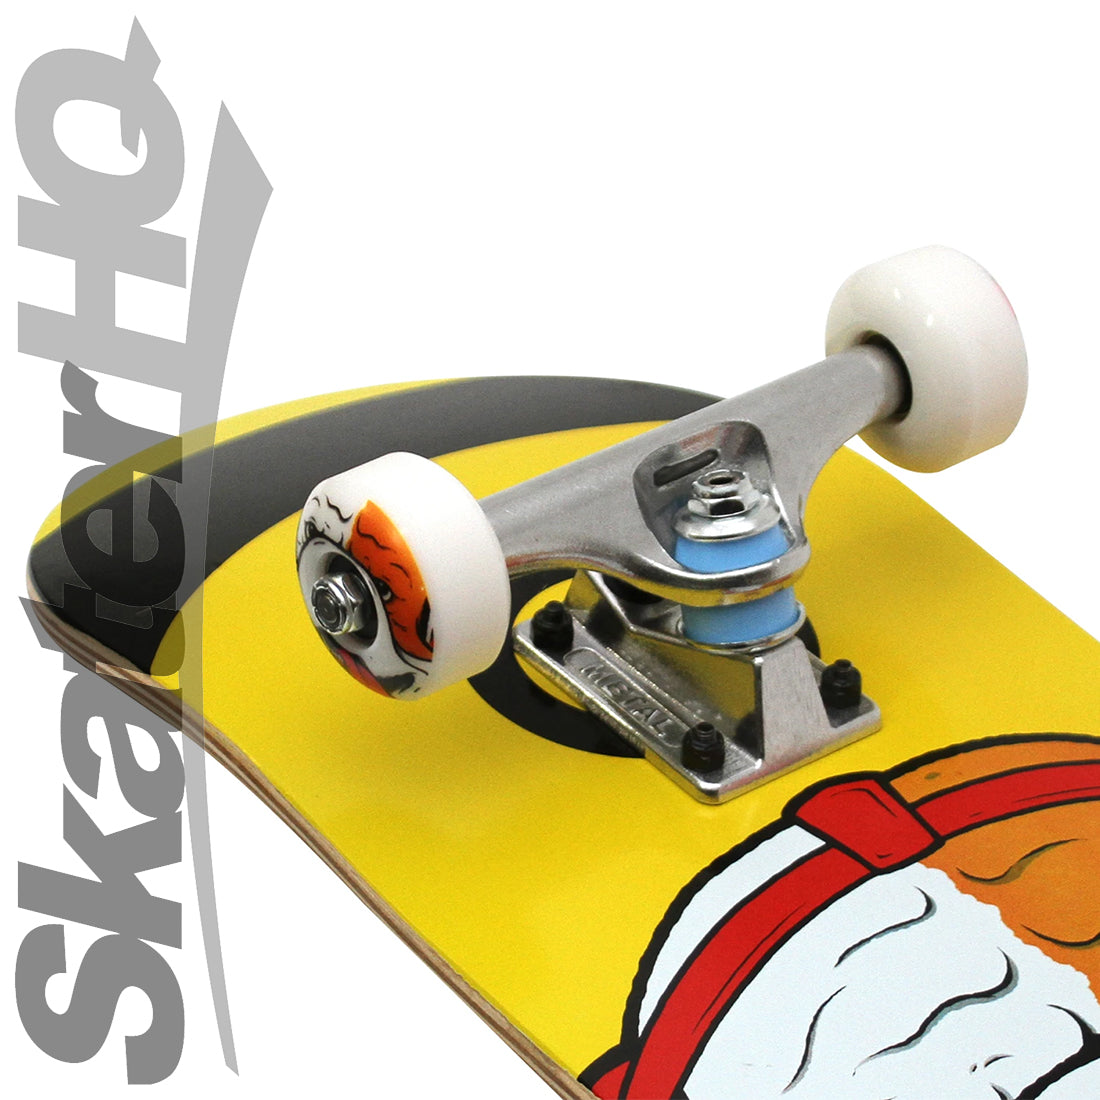 Holiday Sporting Bulldog 7.75 Complete Skateboard Completes Modern Street